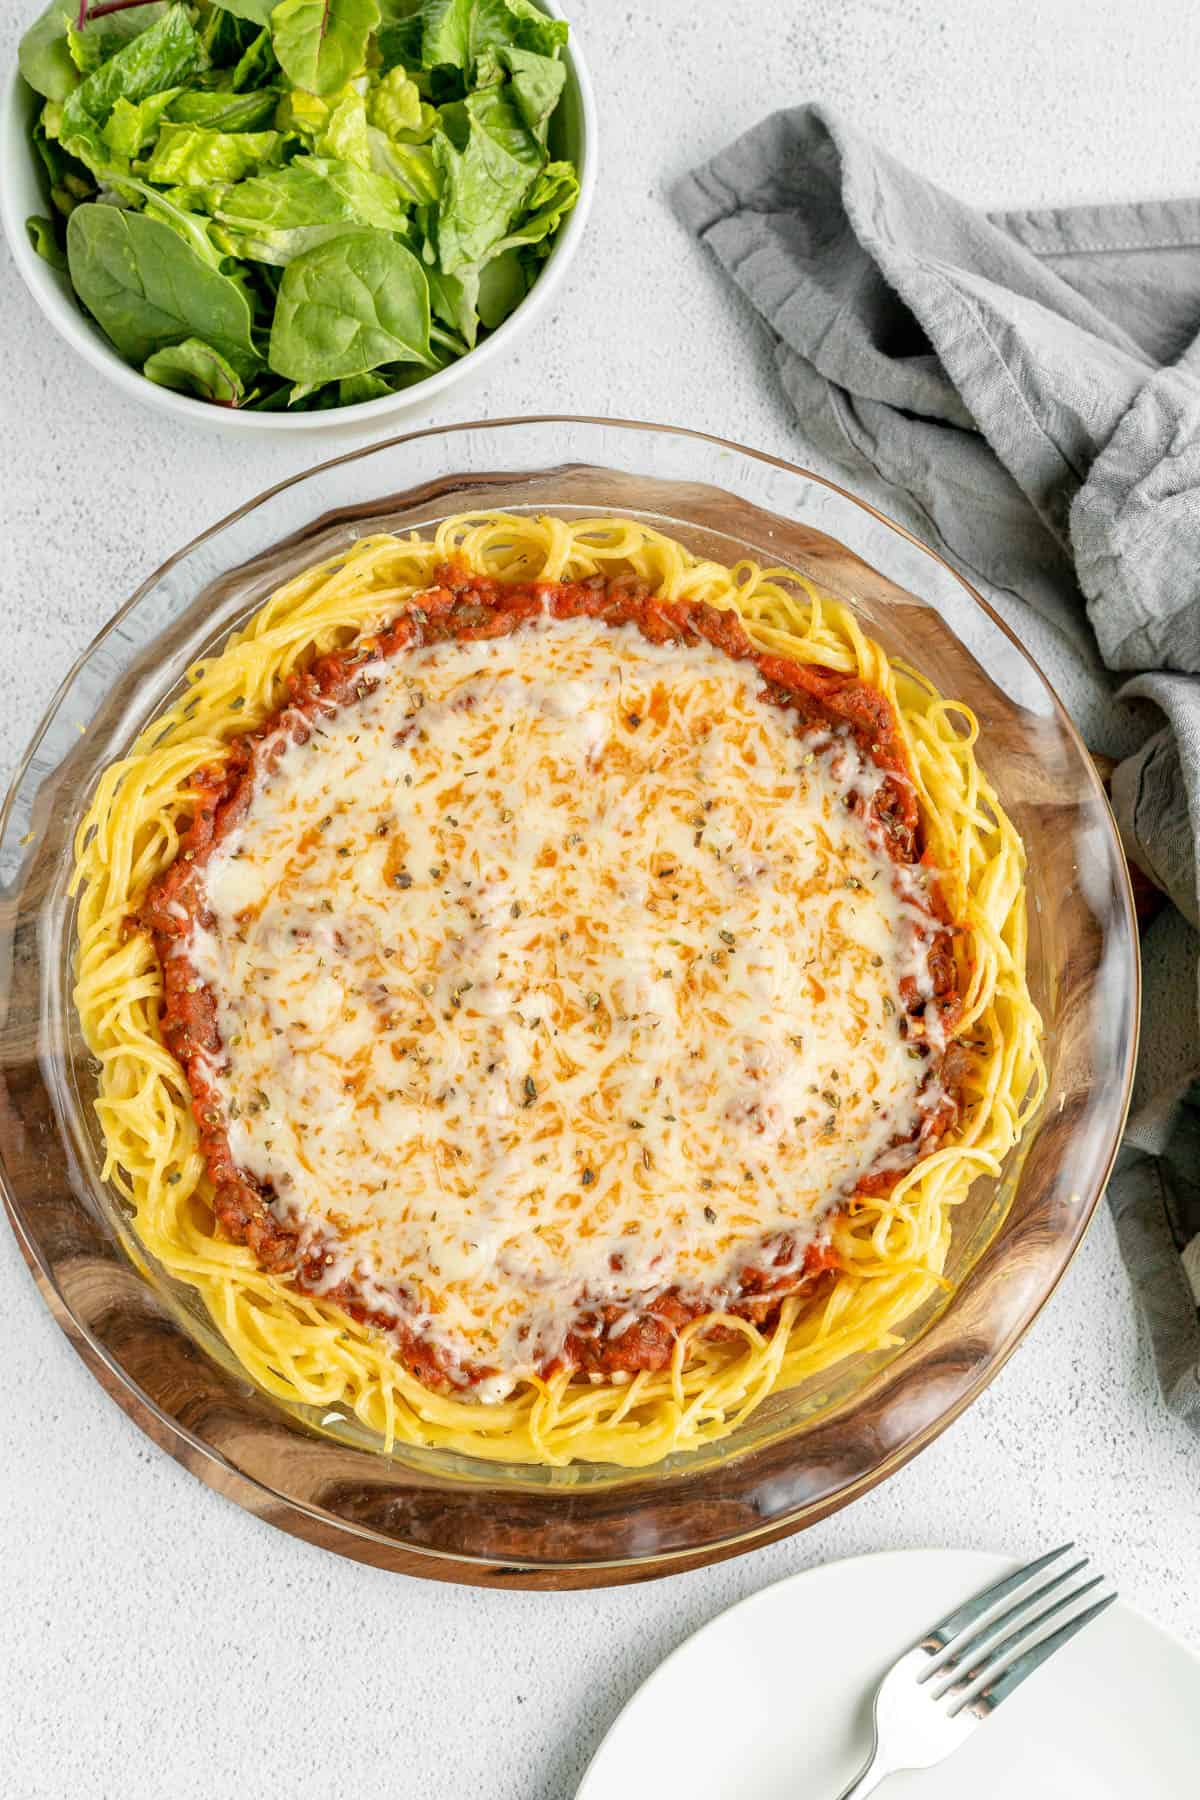 A cooked spaghetti pie next to a bowl of lettuce.